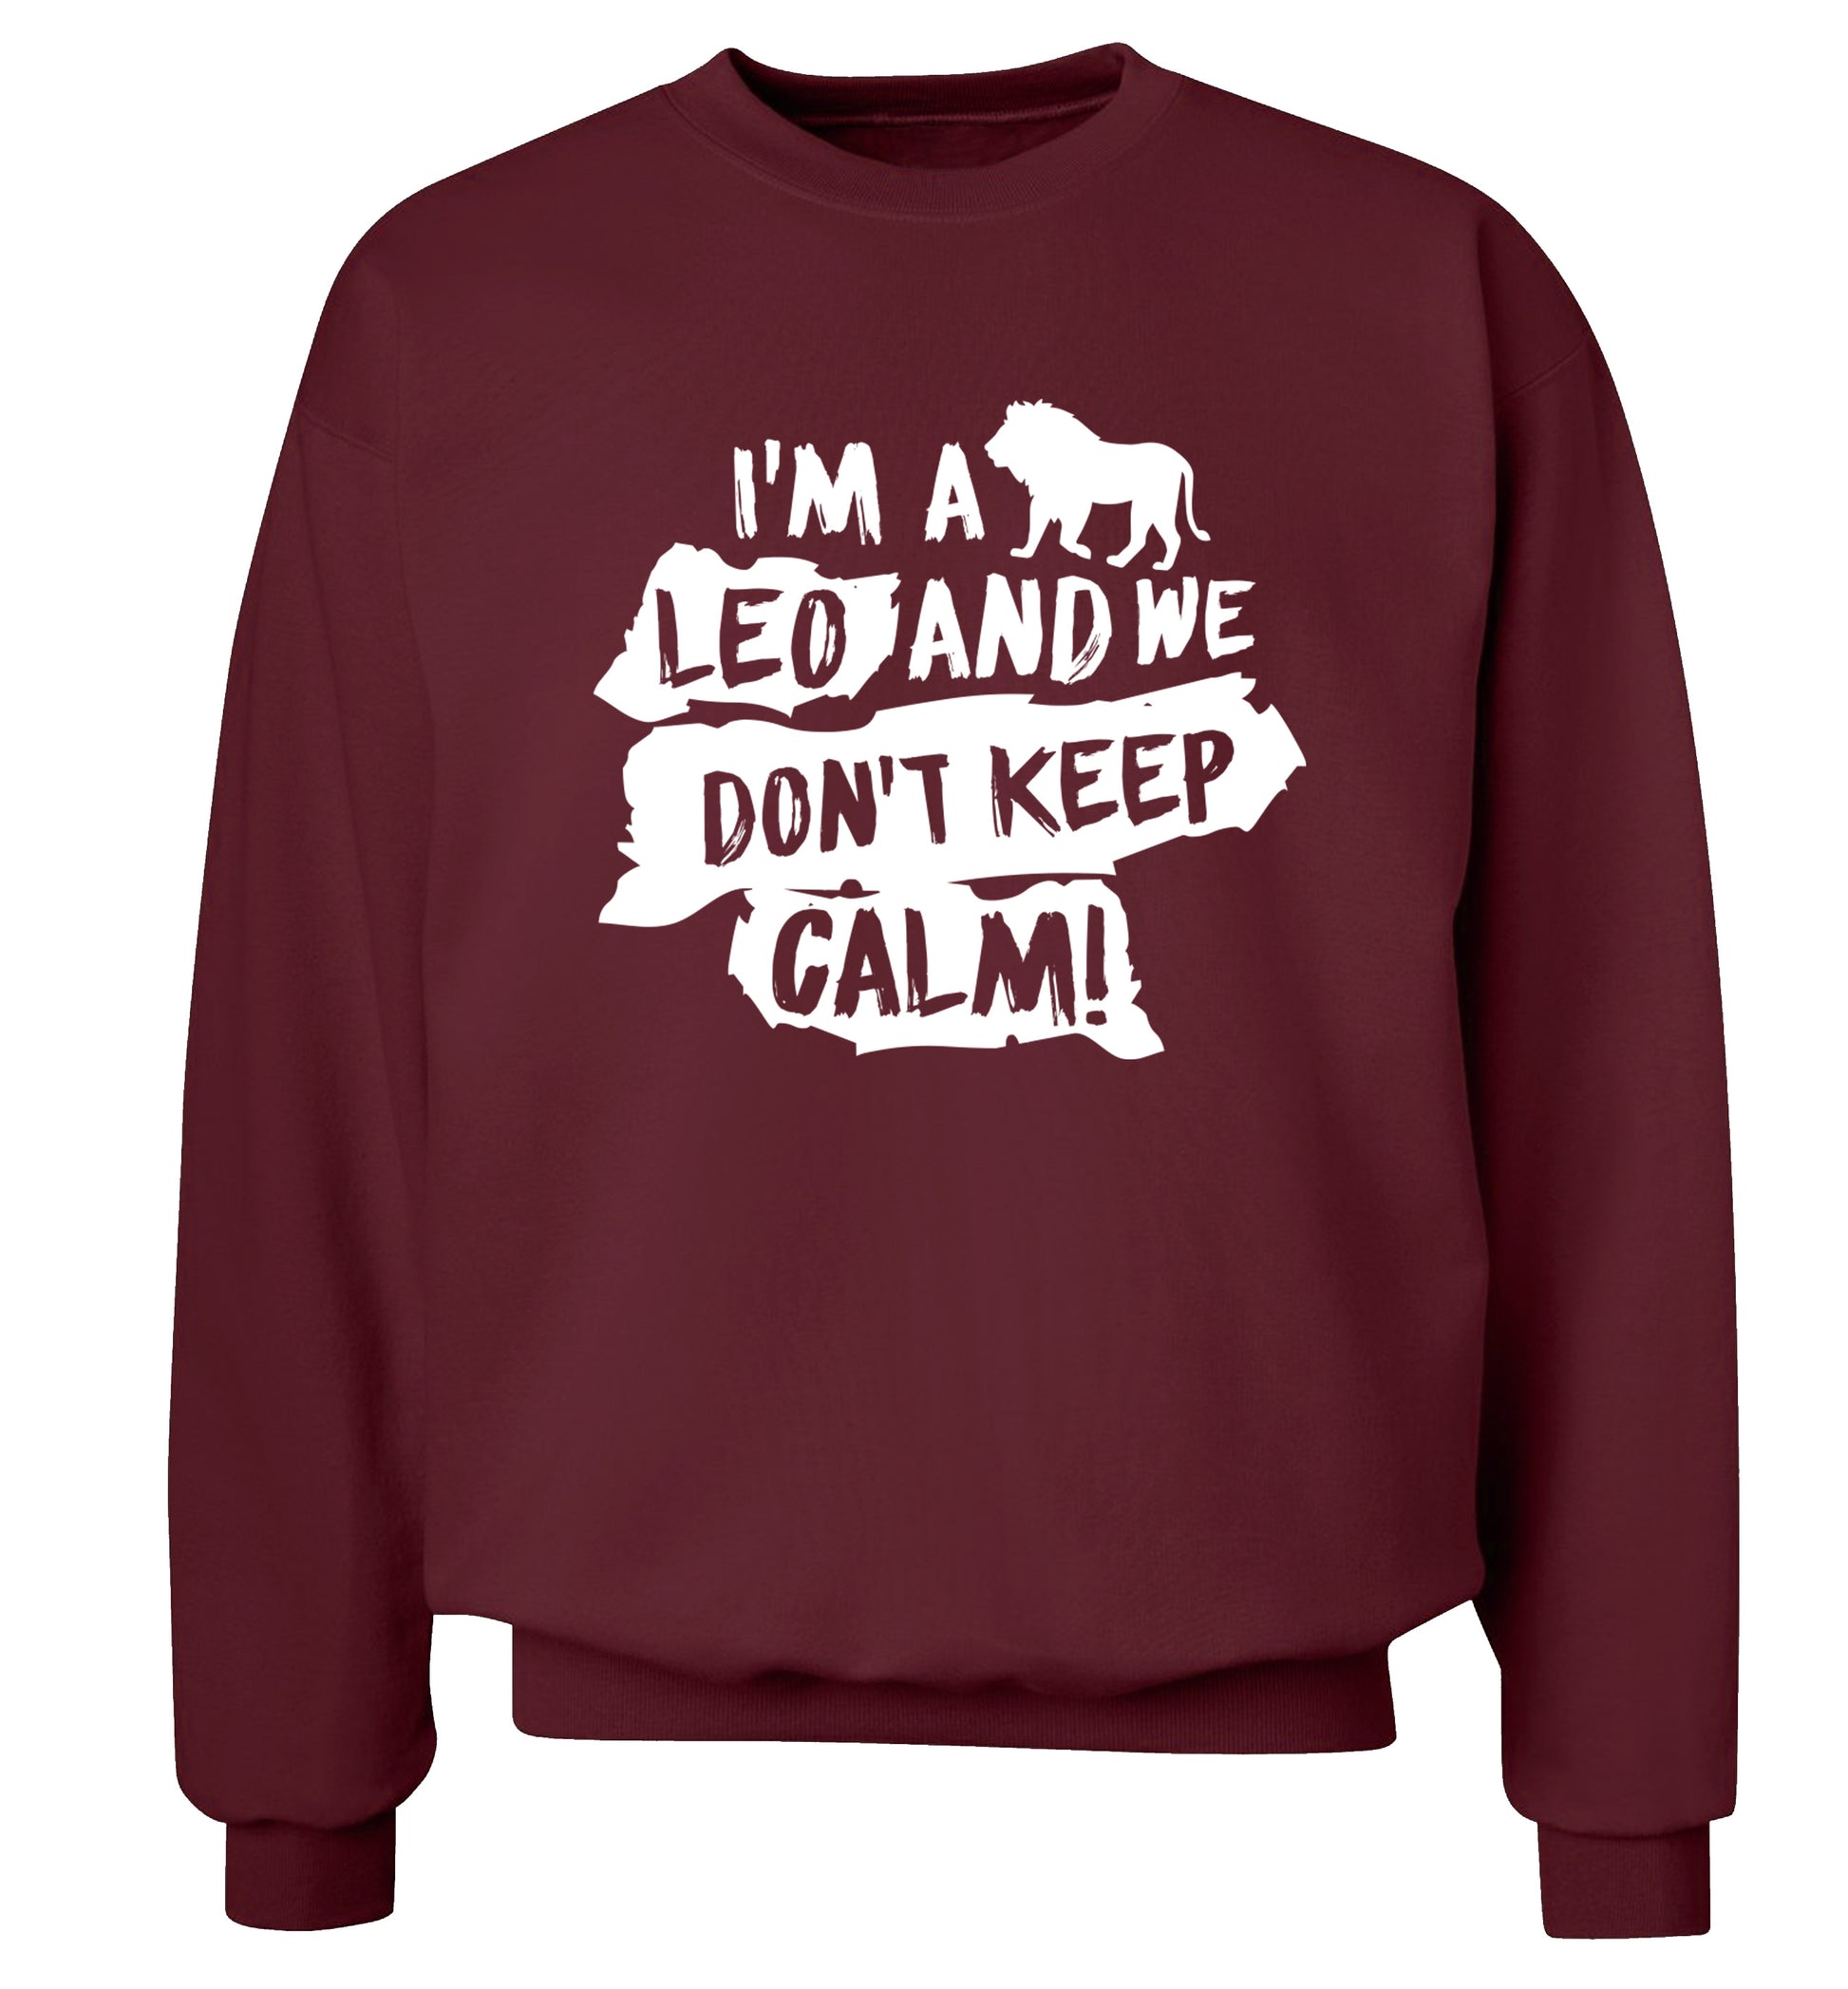 I'm a leo and we don't keep calm! Adult's unisex maroon Sweater 2XL